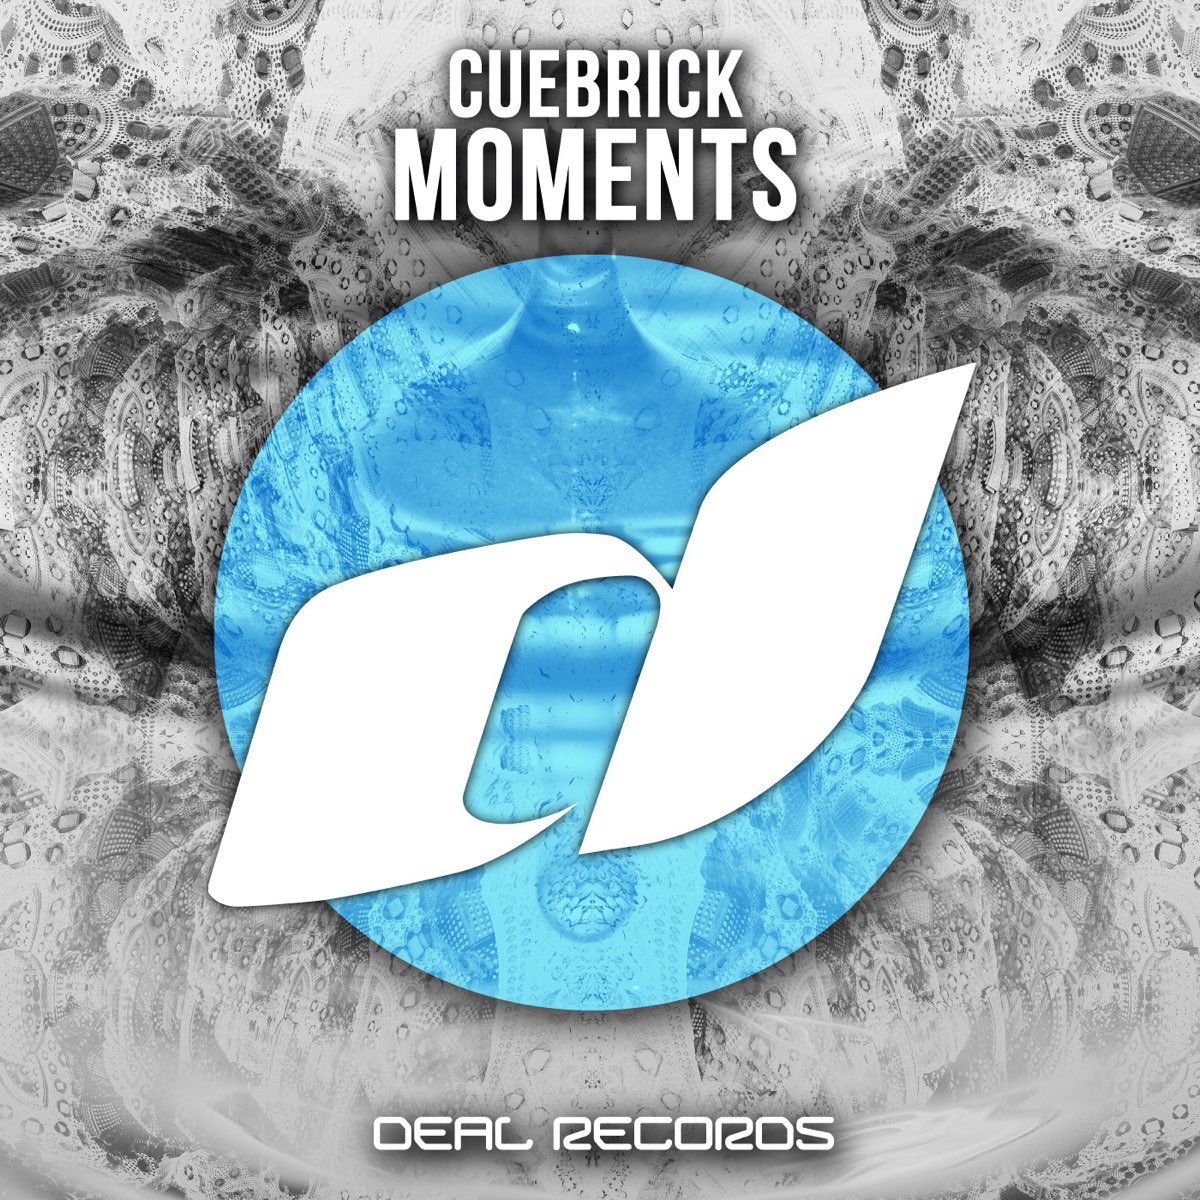 Моменты обложка. Deal records 2014. Cuebrick album pictures. Cuebrick by your Side mp3. Sides mp3